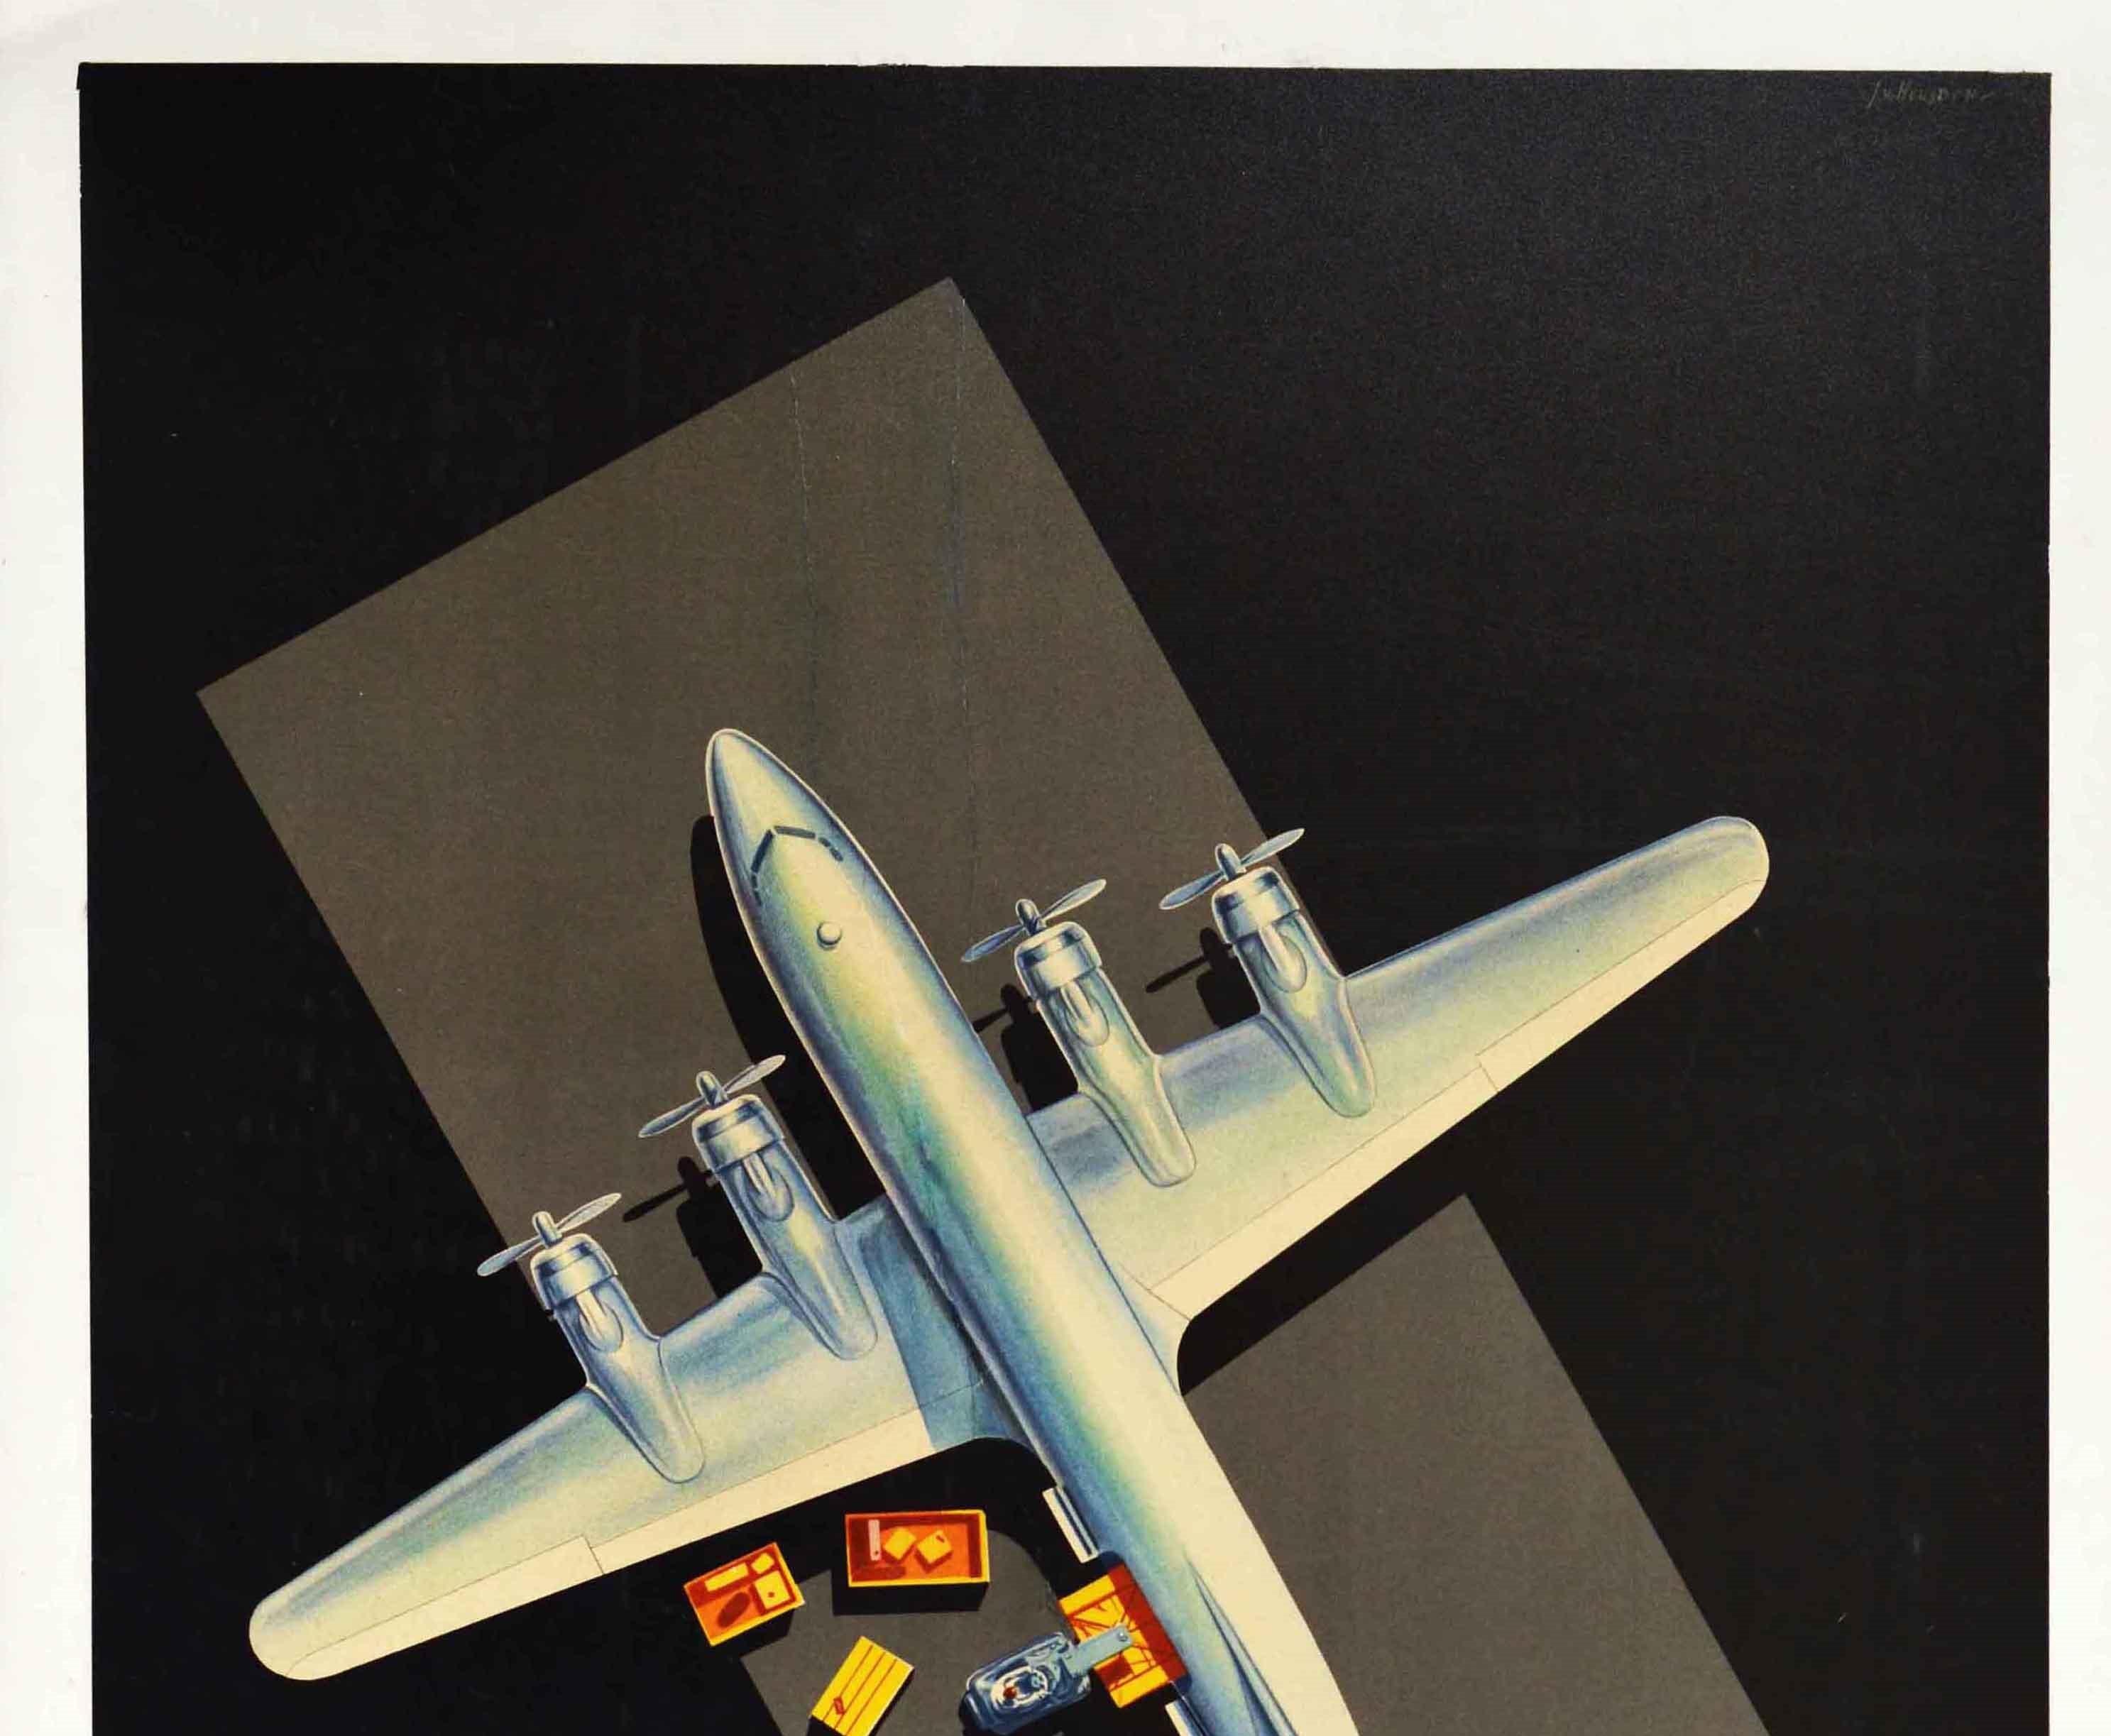 Original Vintage Poster Your Freight By KLM Royal Dutch Airlines Midcentury Art - Print by J. V. Heusden